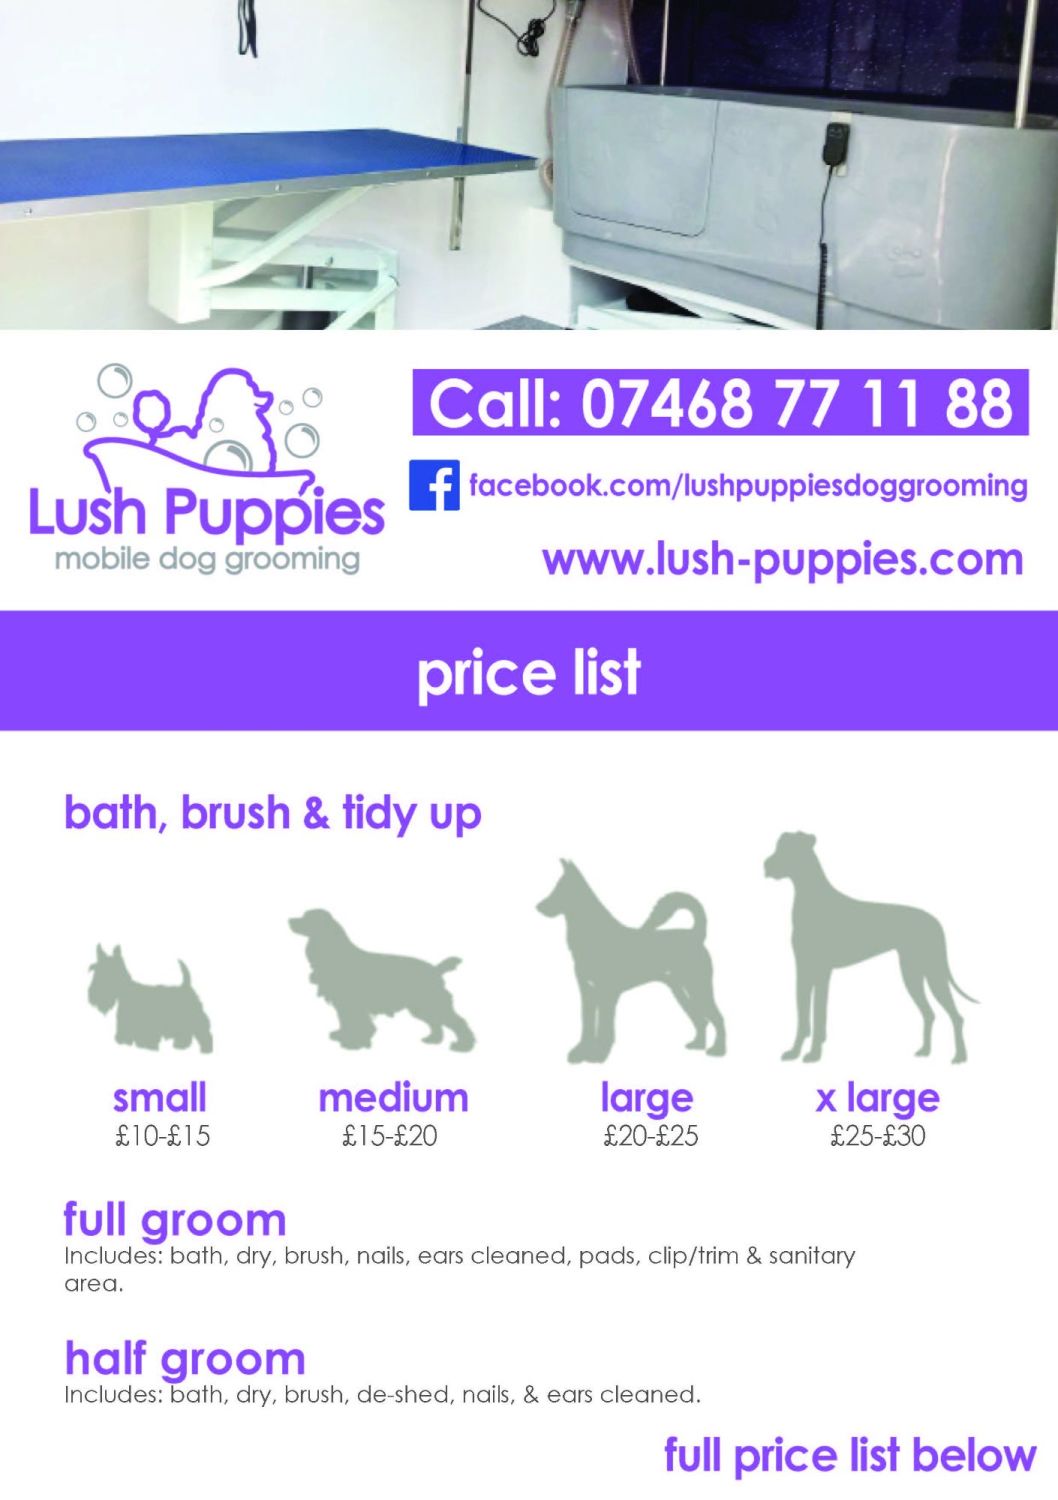 dog-grooming-price-list-design-3-copies-printed-and-laminated